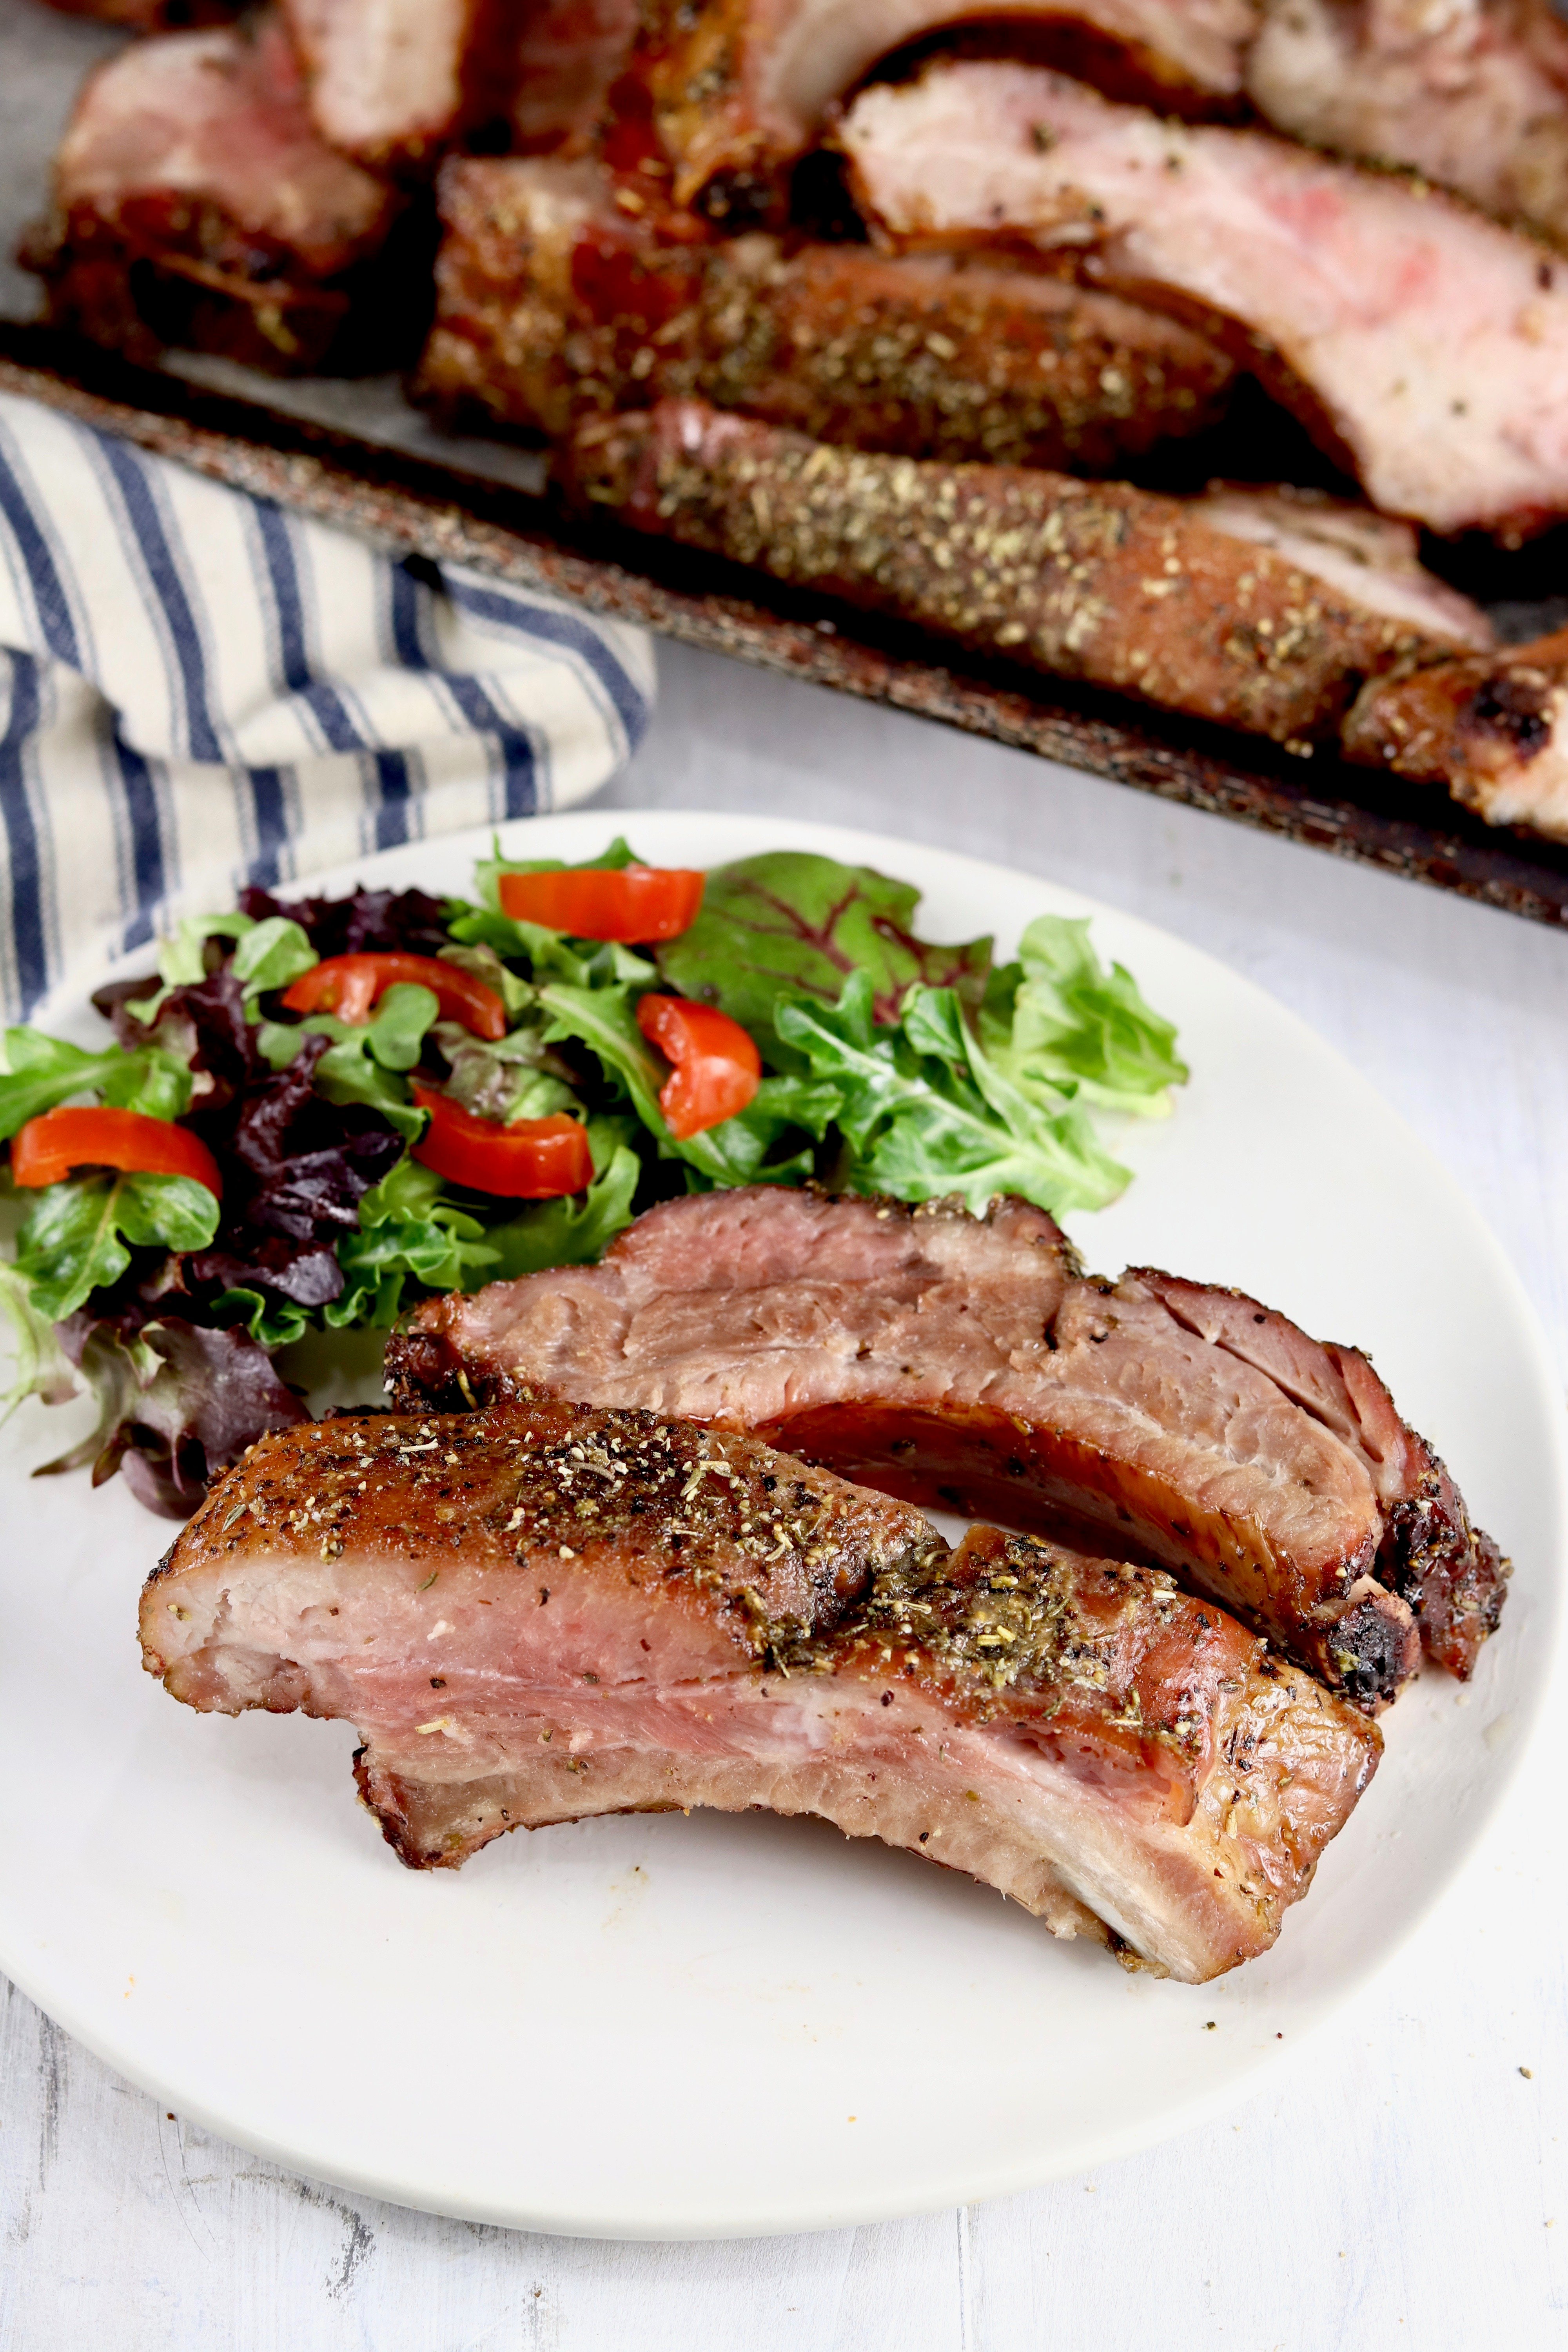 Smoked Baby Back Ribs on a plate with green salad